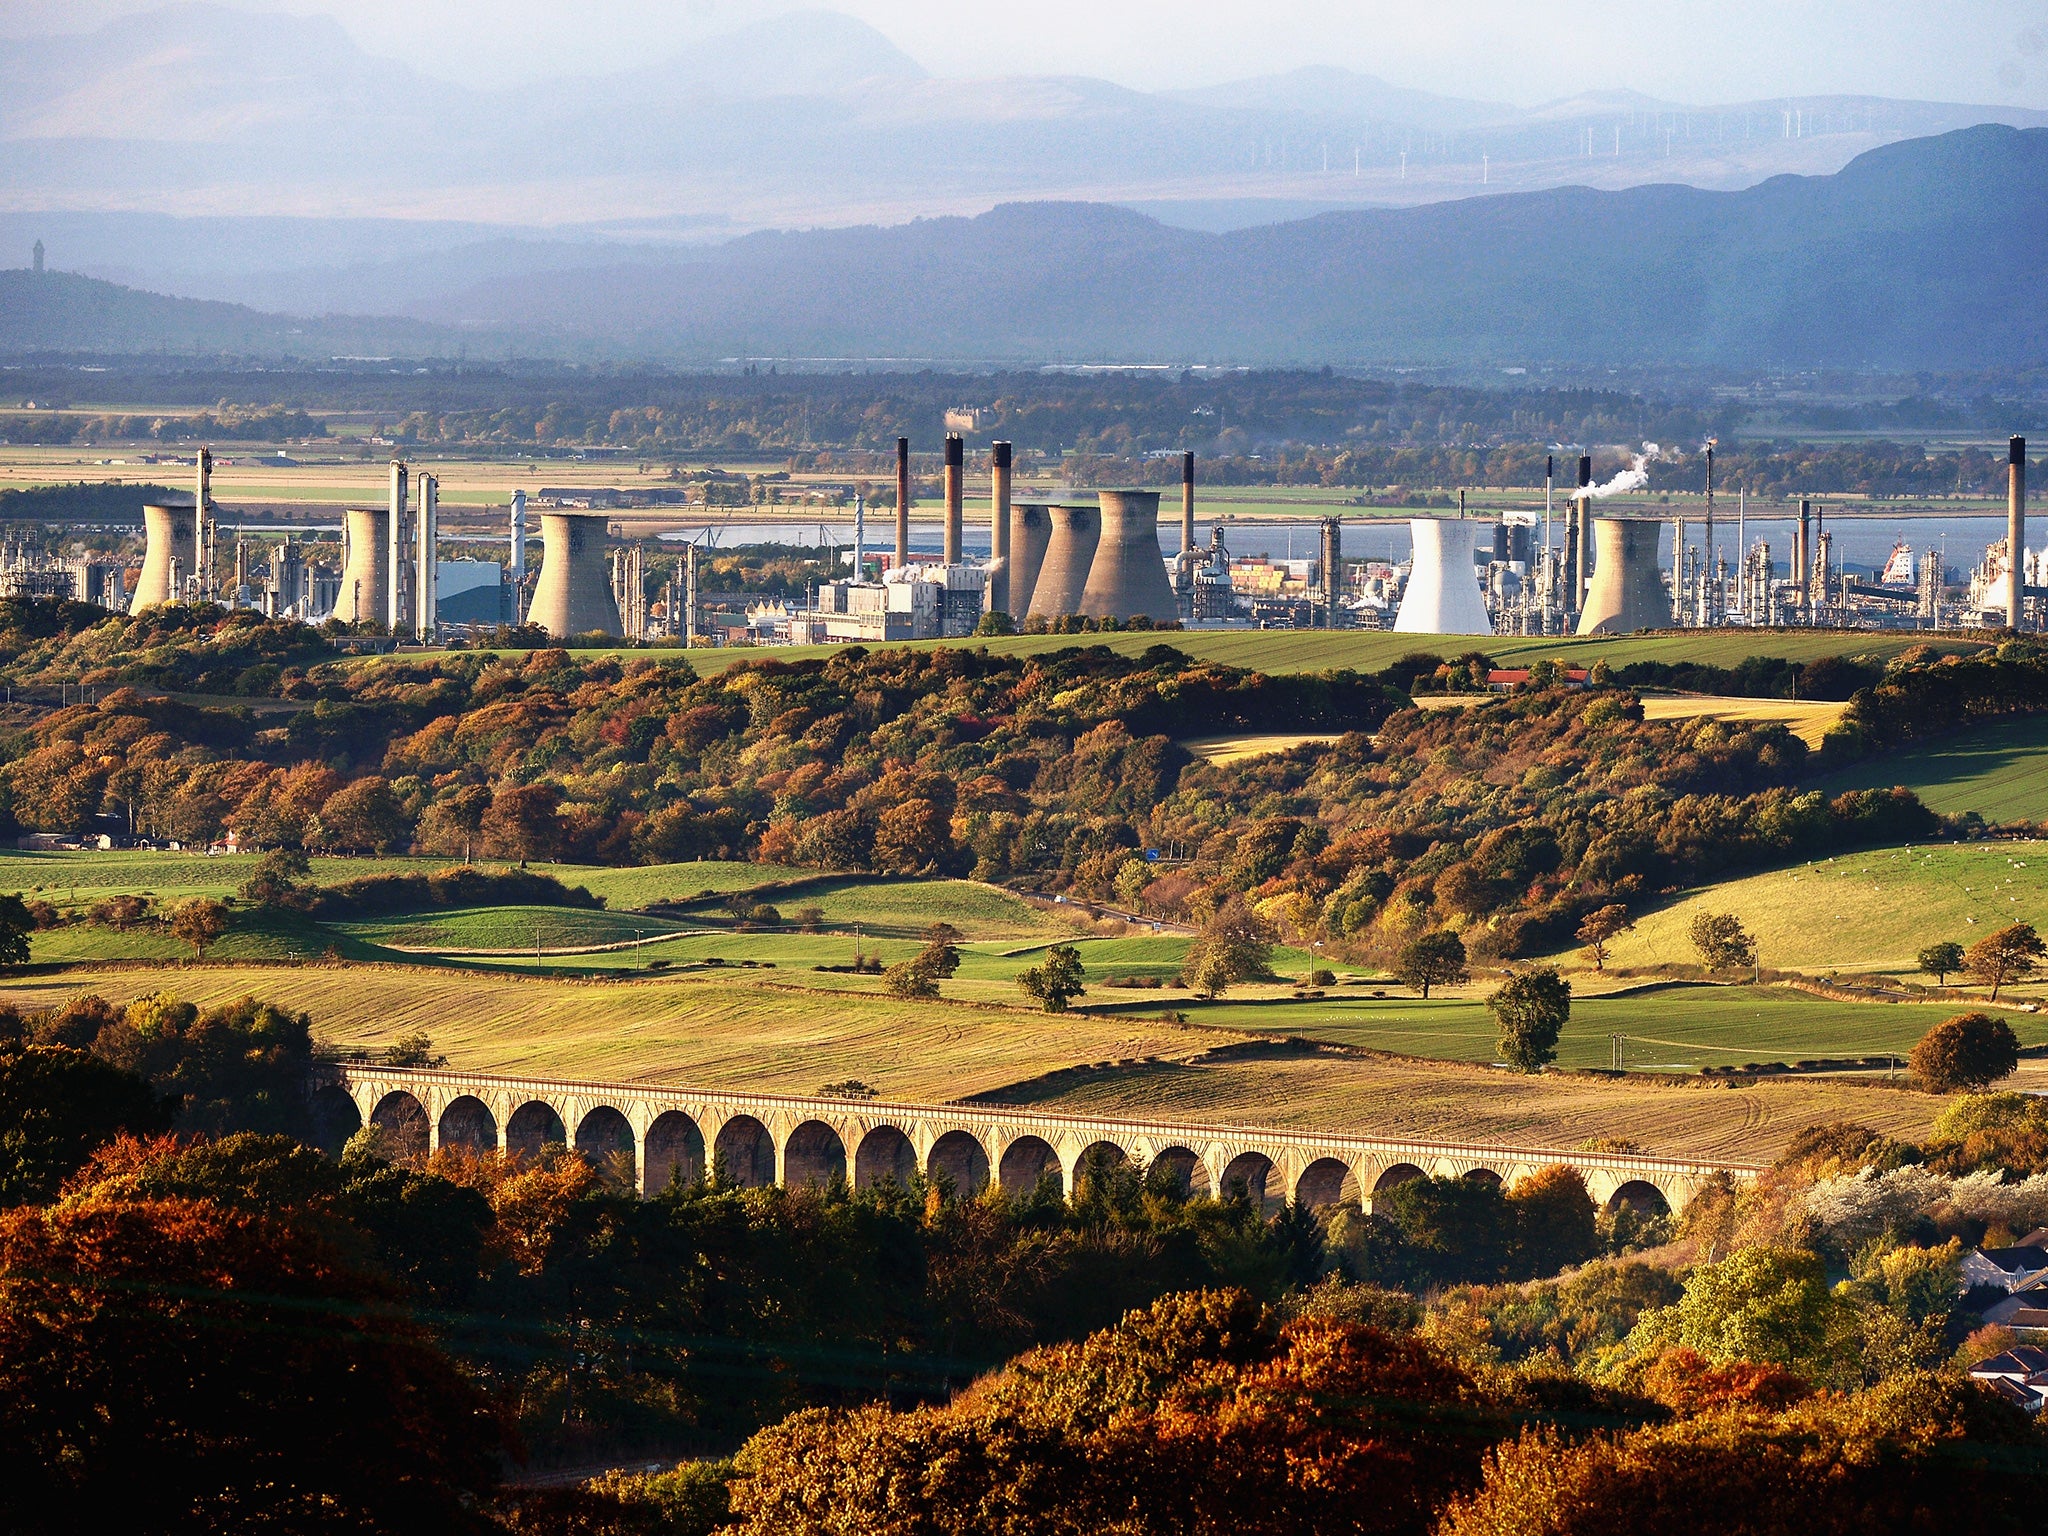 Fields of dreams: the Grangemouth refining and petrochemical complex in Scotland